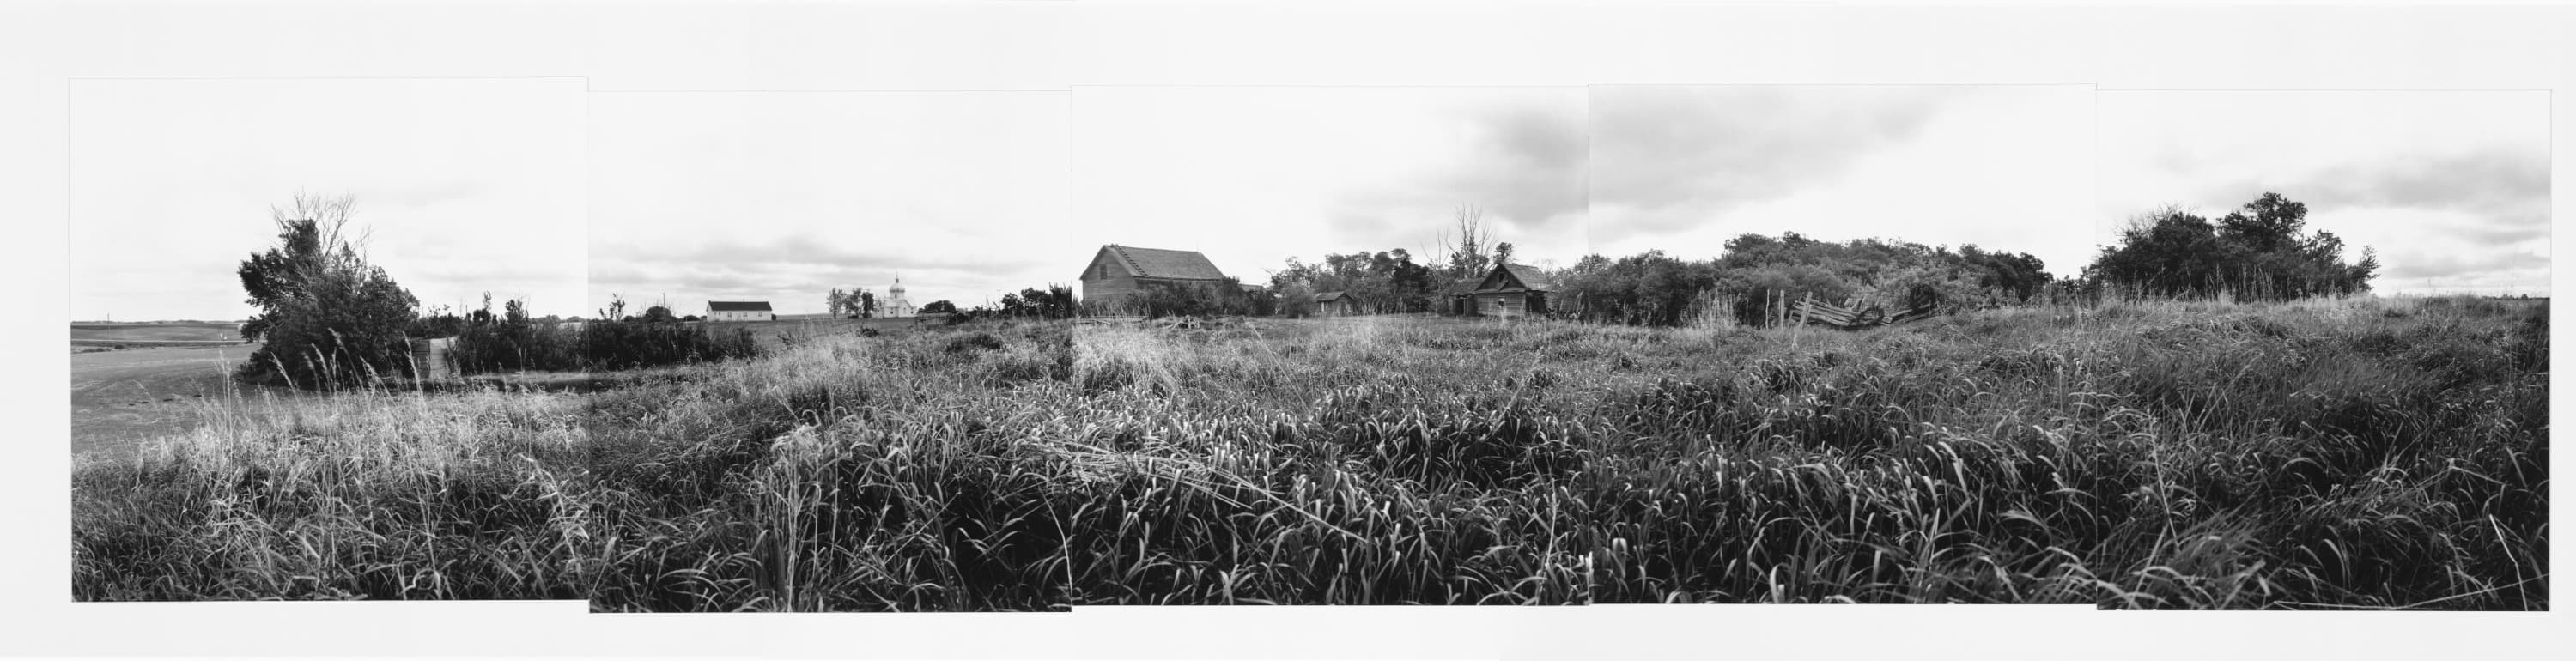 Black and white panorama of prairie landscape with some old buildings in distant background and tall grass in foreground.